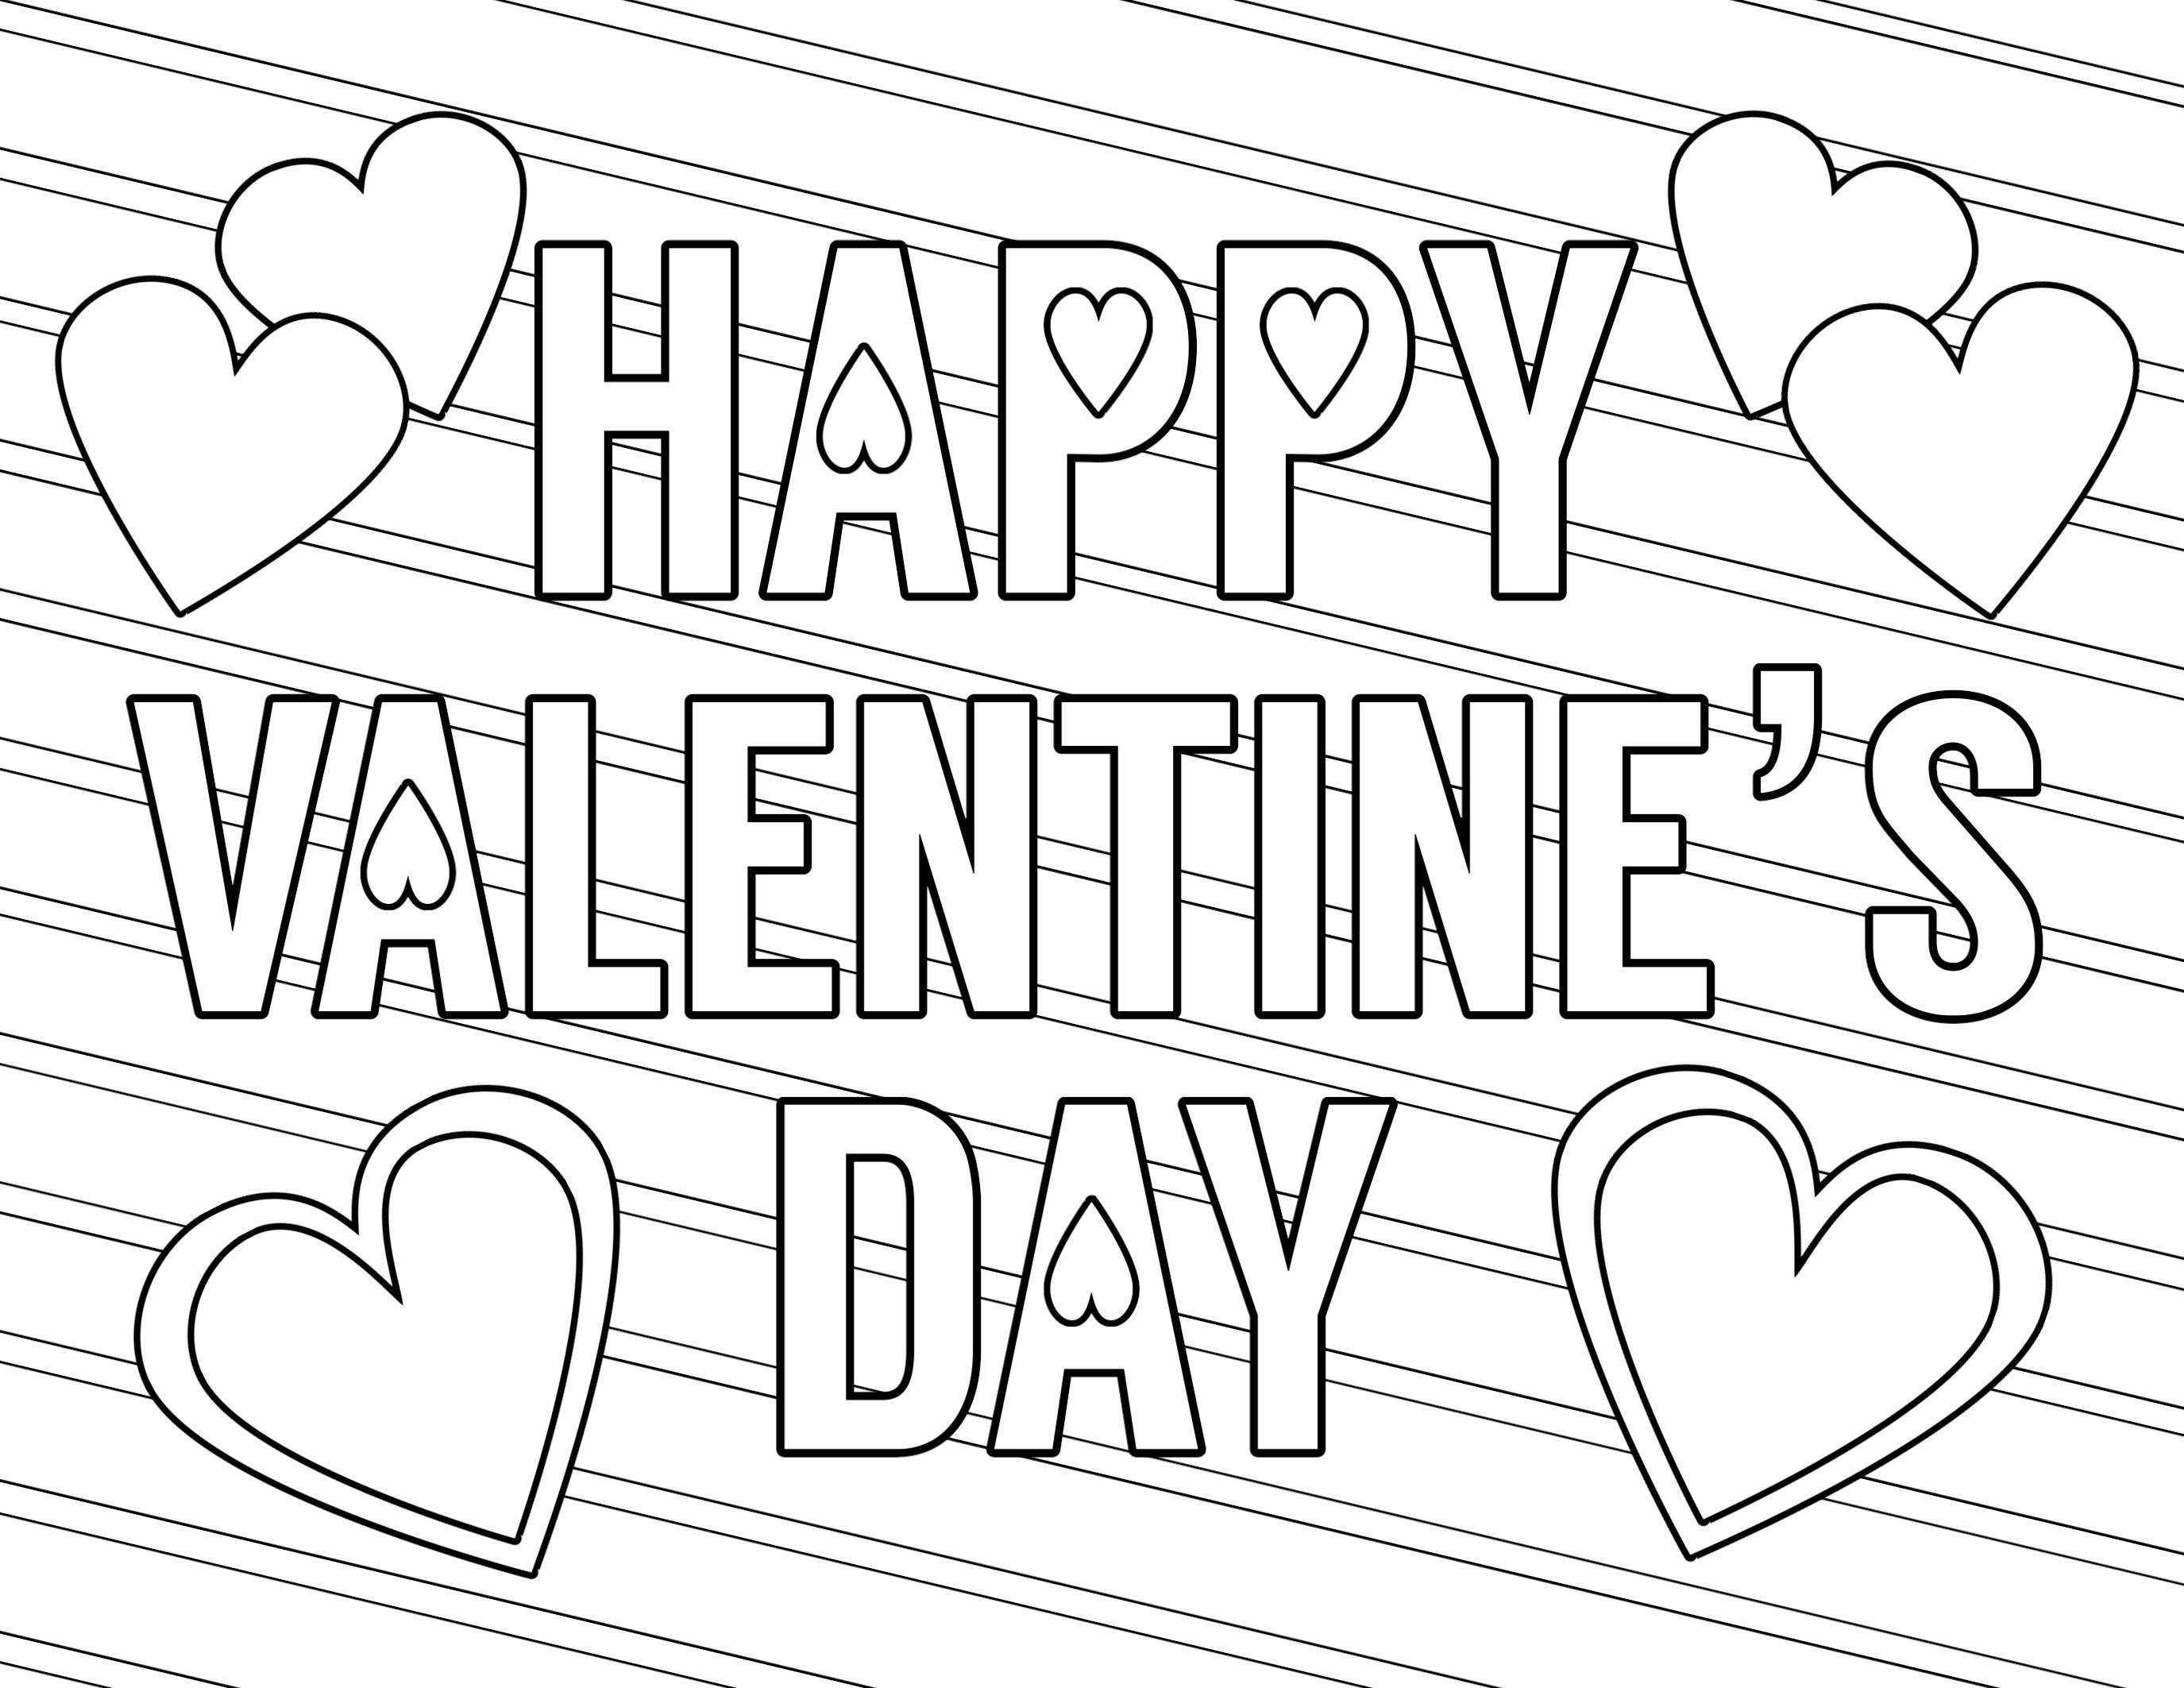 Free Printable Valentine Coloring Pages - Paper Trail Design - Free Printable Valentines Day Coloring Pages